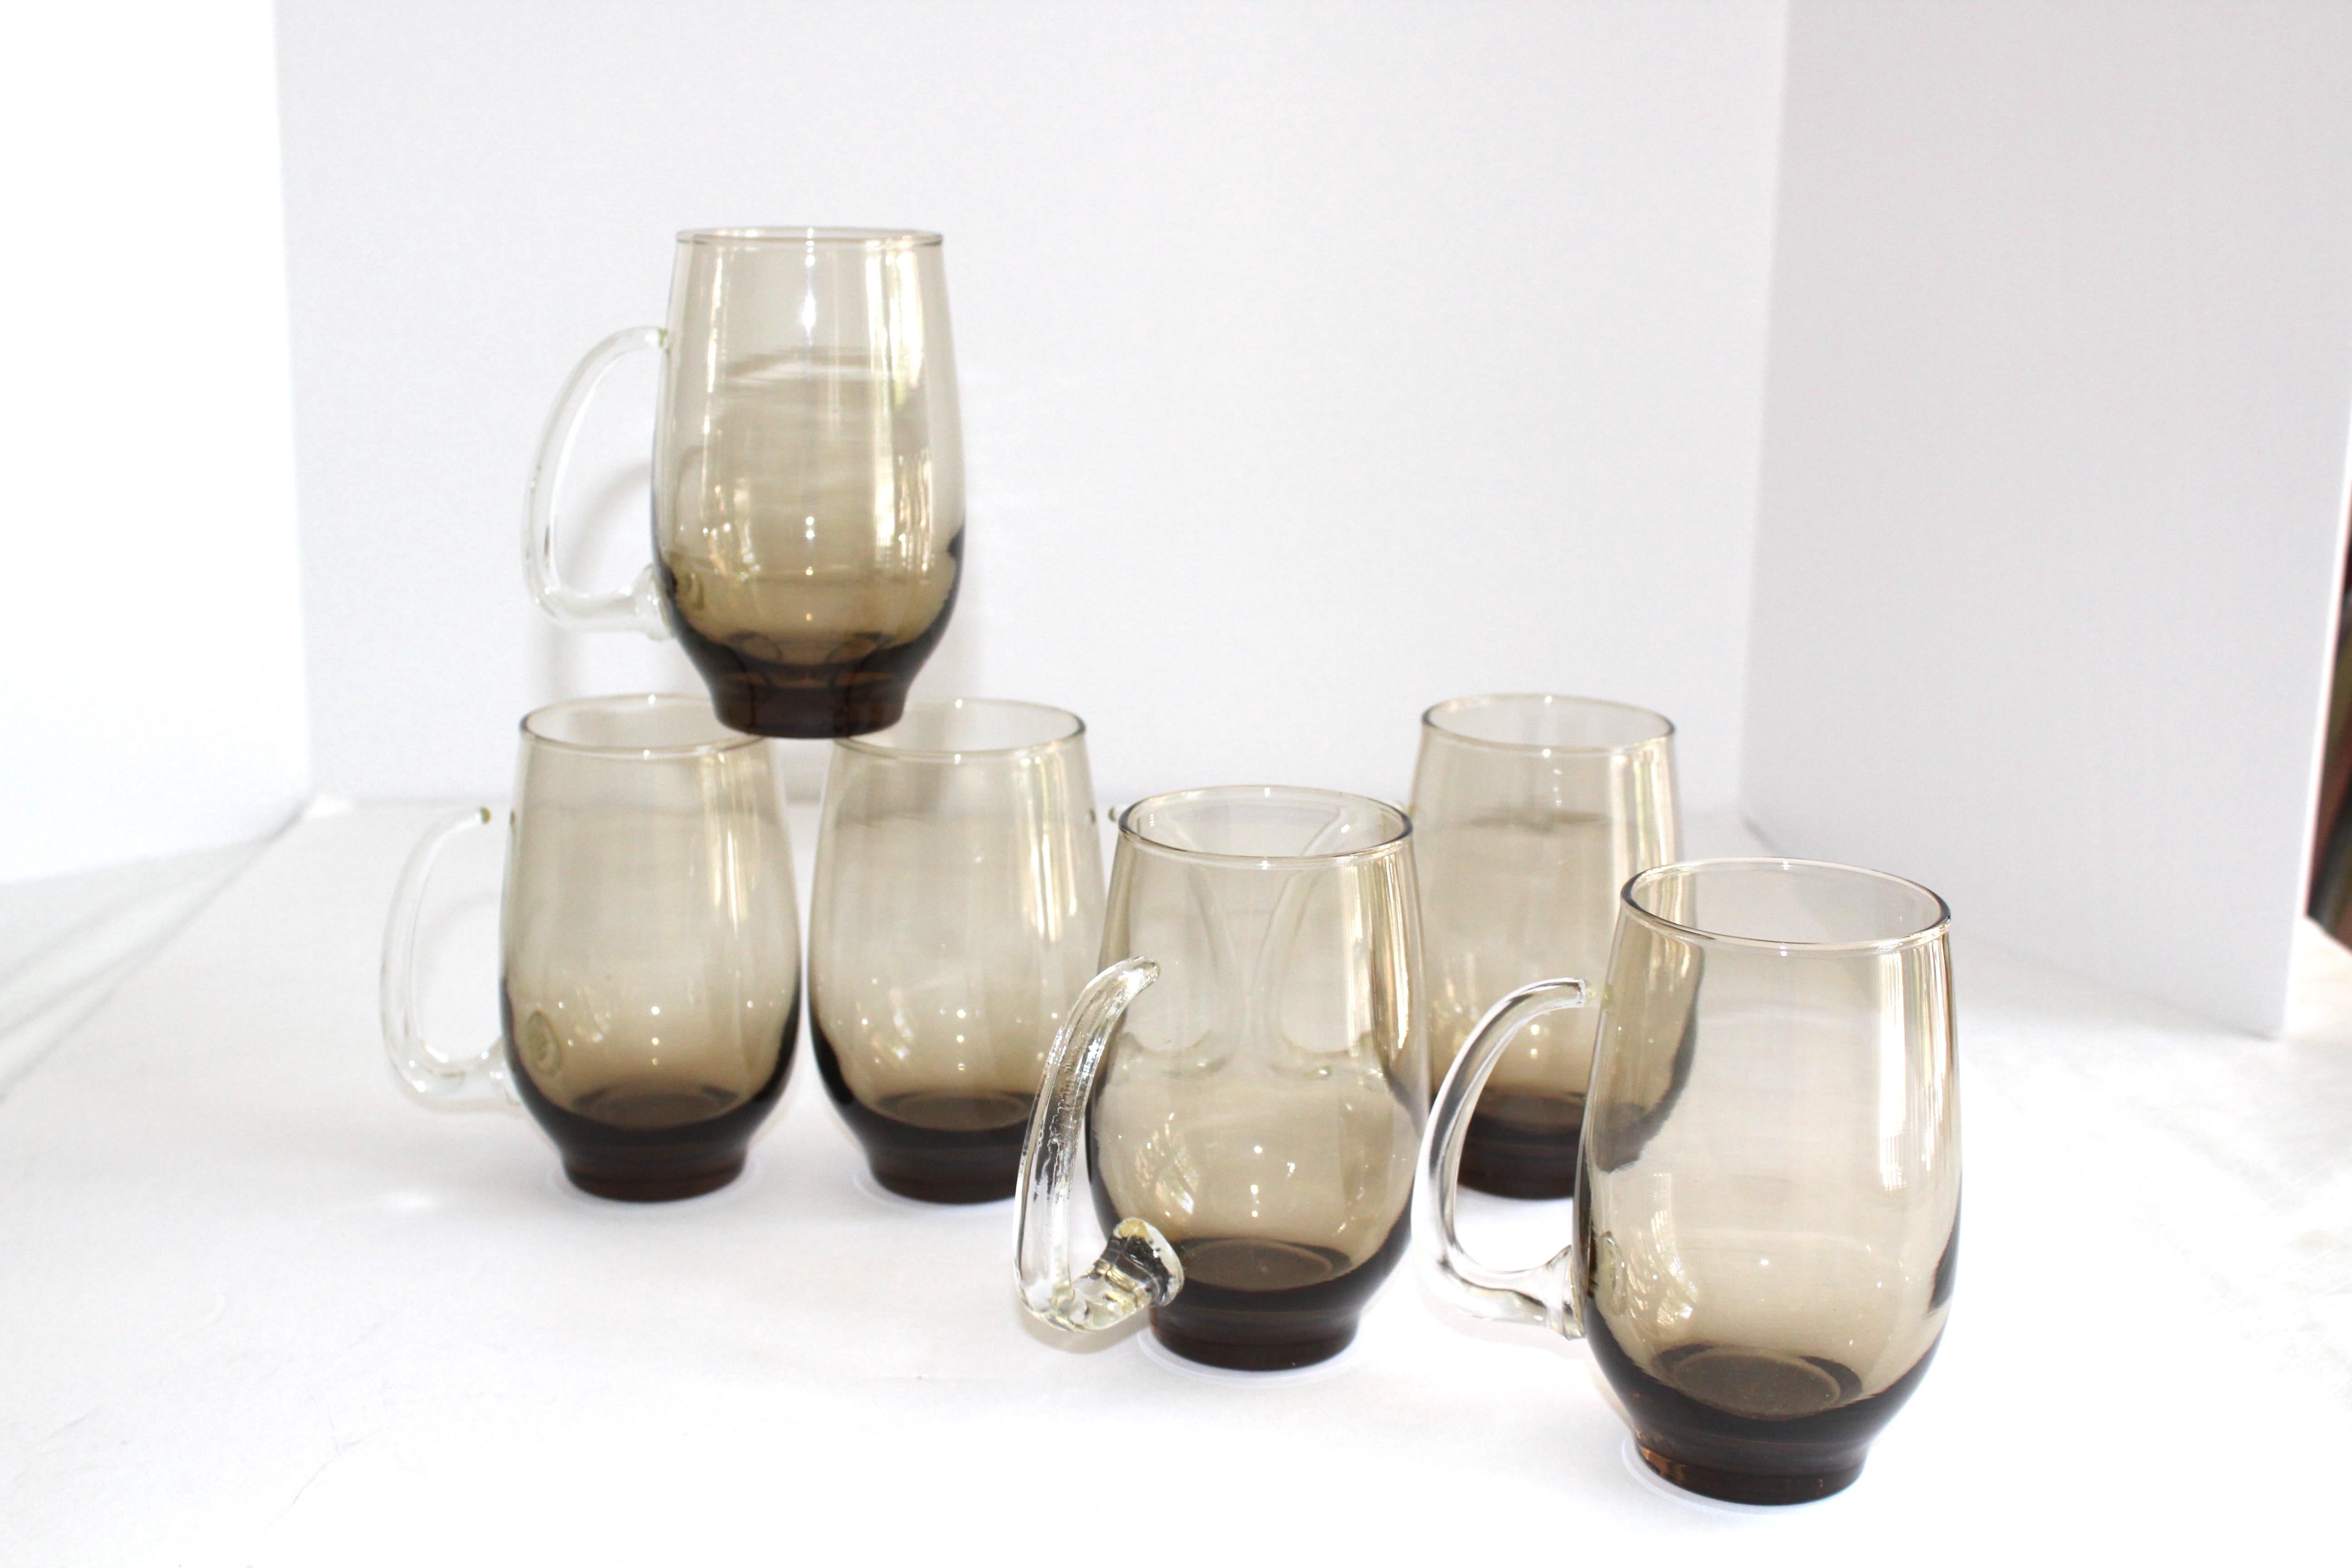 Mid-20th Century Set of Six Mid-Century Modern Tinted Glass Mugs by Libbey Glass Co.